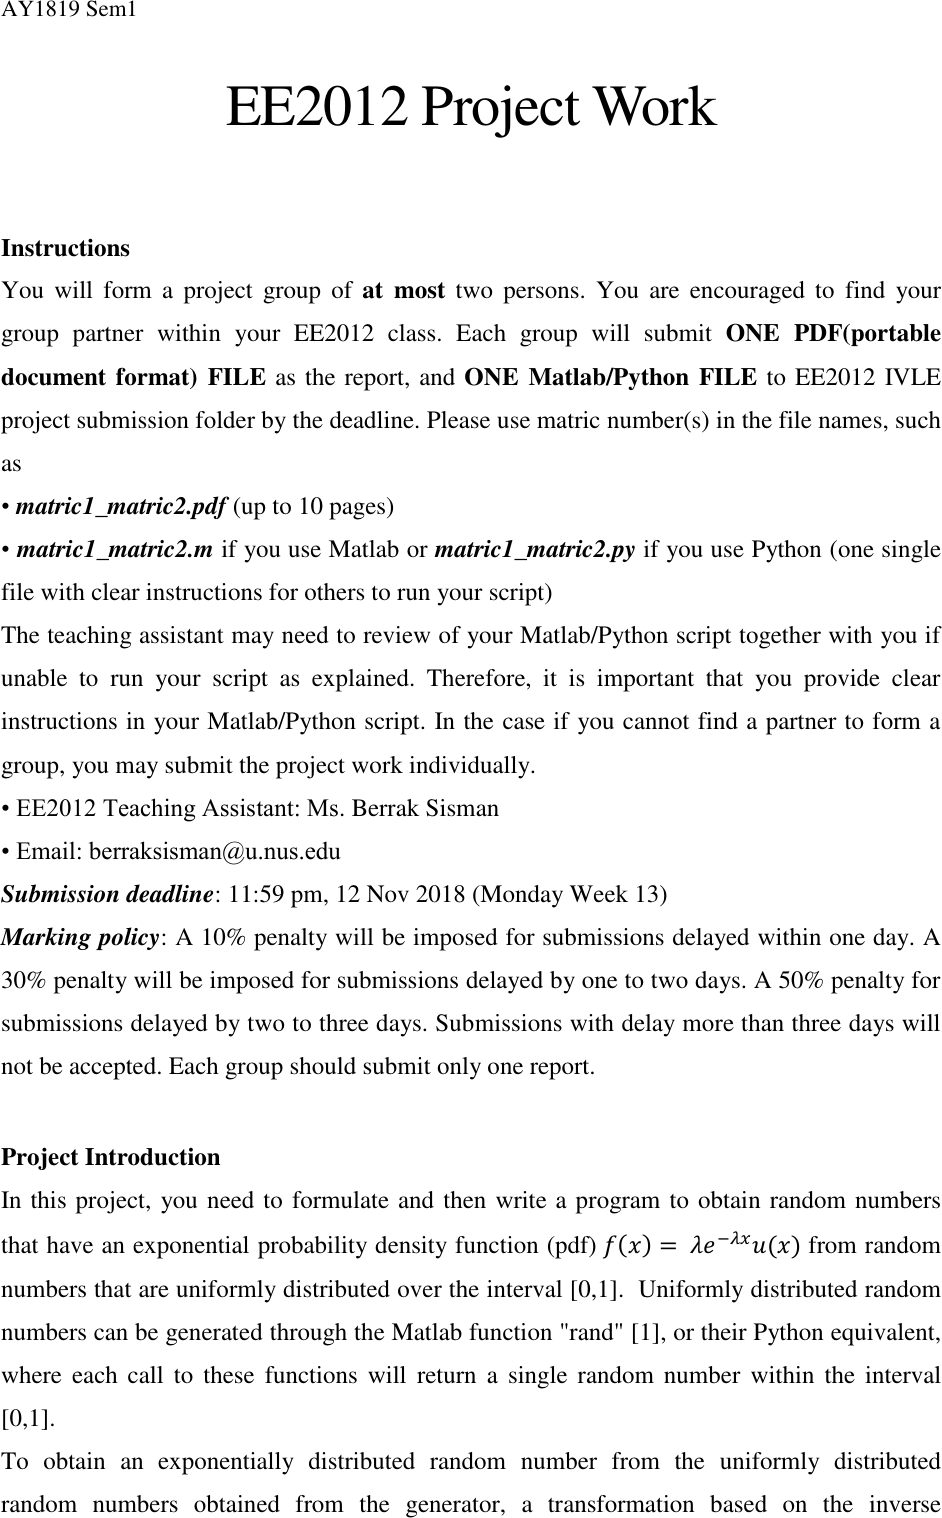 Page 1 of 2 - EE2012 Project Instructions